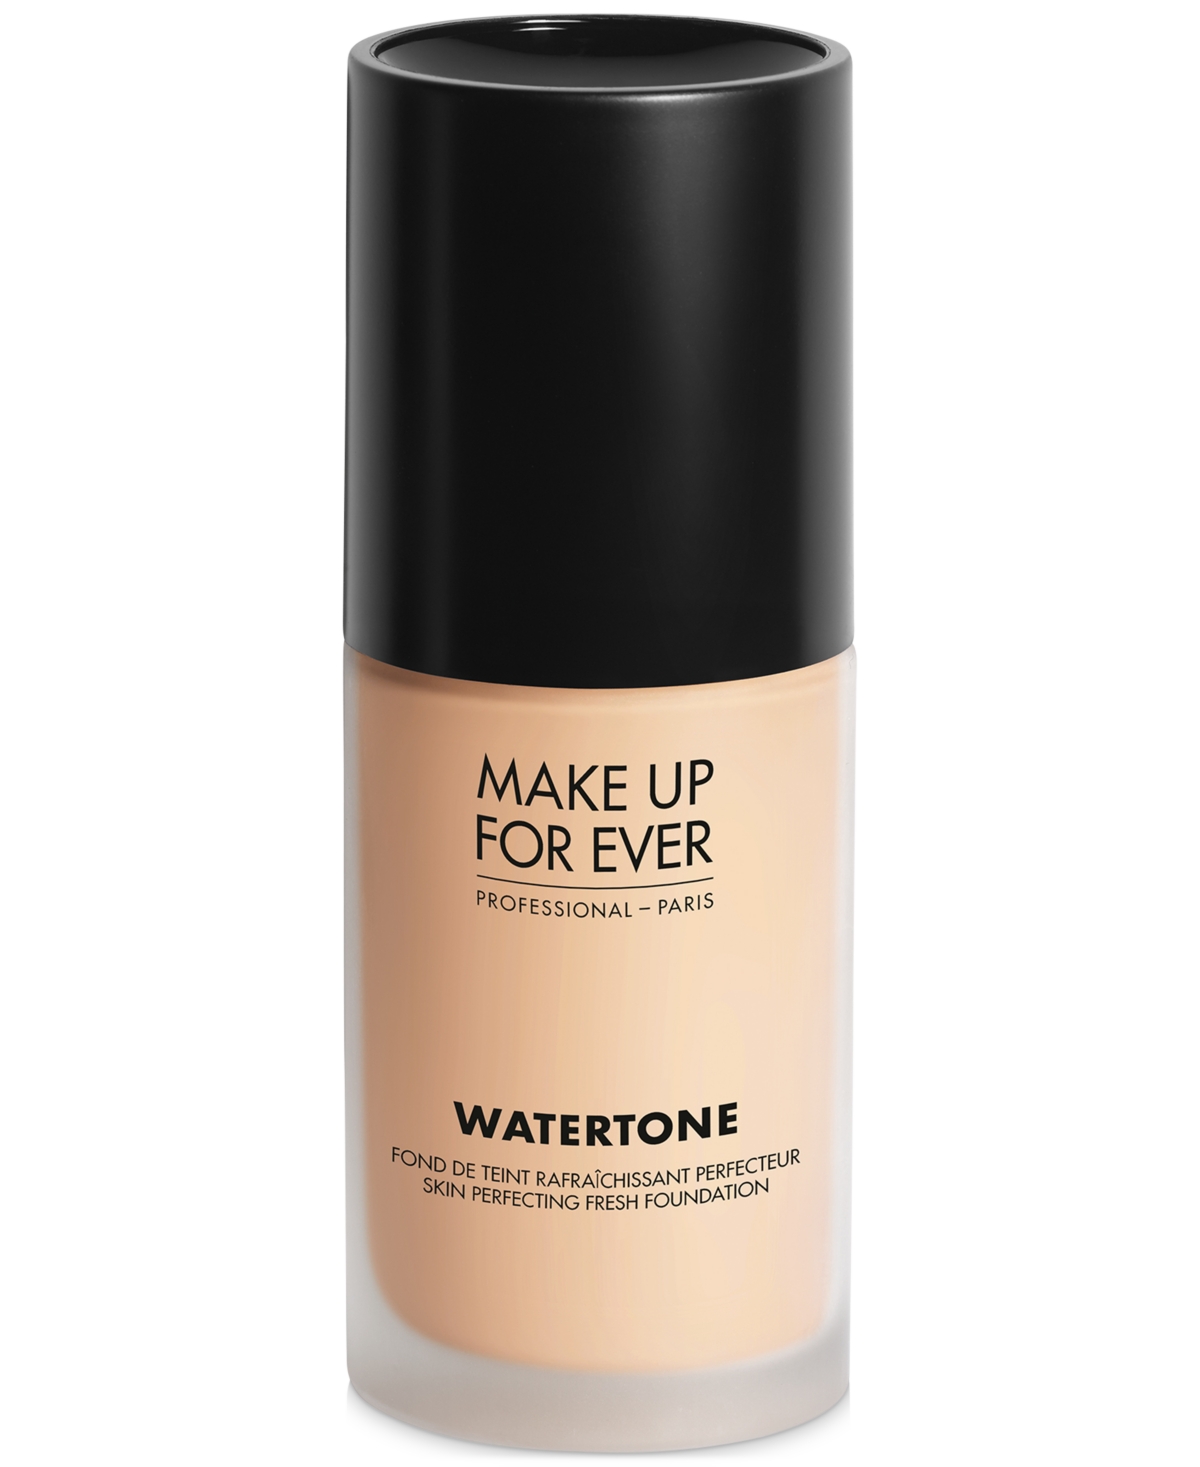 Make Up For Ever Watertone Skin-Perfecting Foundation